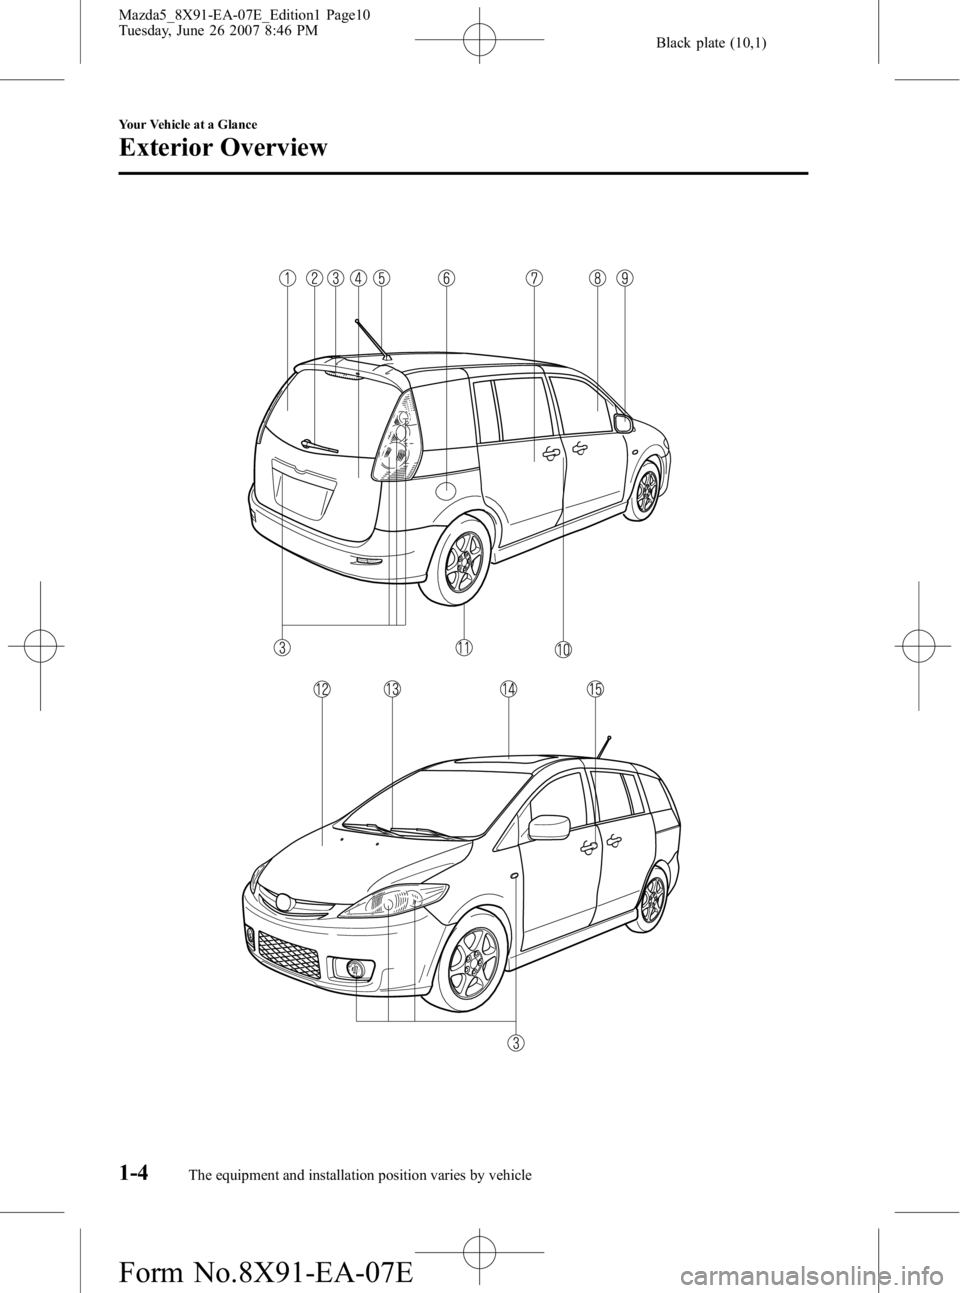 MAZDA MODEL 5 2007  Owners Manual Black plate (10,1)
1-4
Your Vehicle at a Glance
The equipment and installation position varies by vehicle
Exterior Overview
Mazda5_8X91-EA-07E_Edition1 Page10
Tuesday, June 26 2007 8:46 PM
Form No.8X9